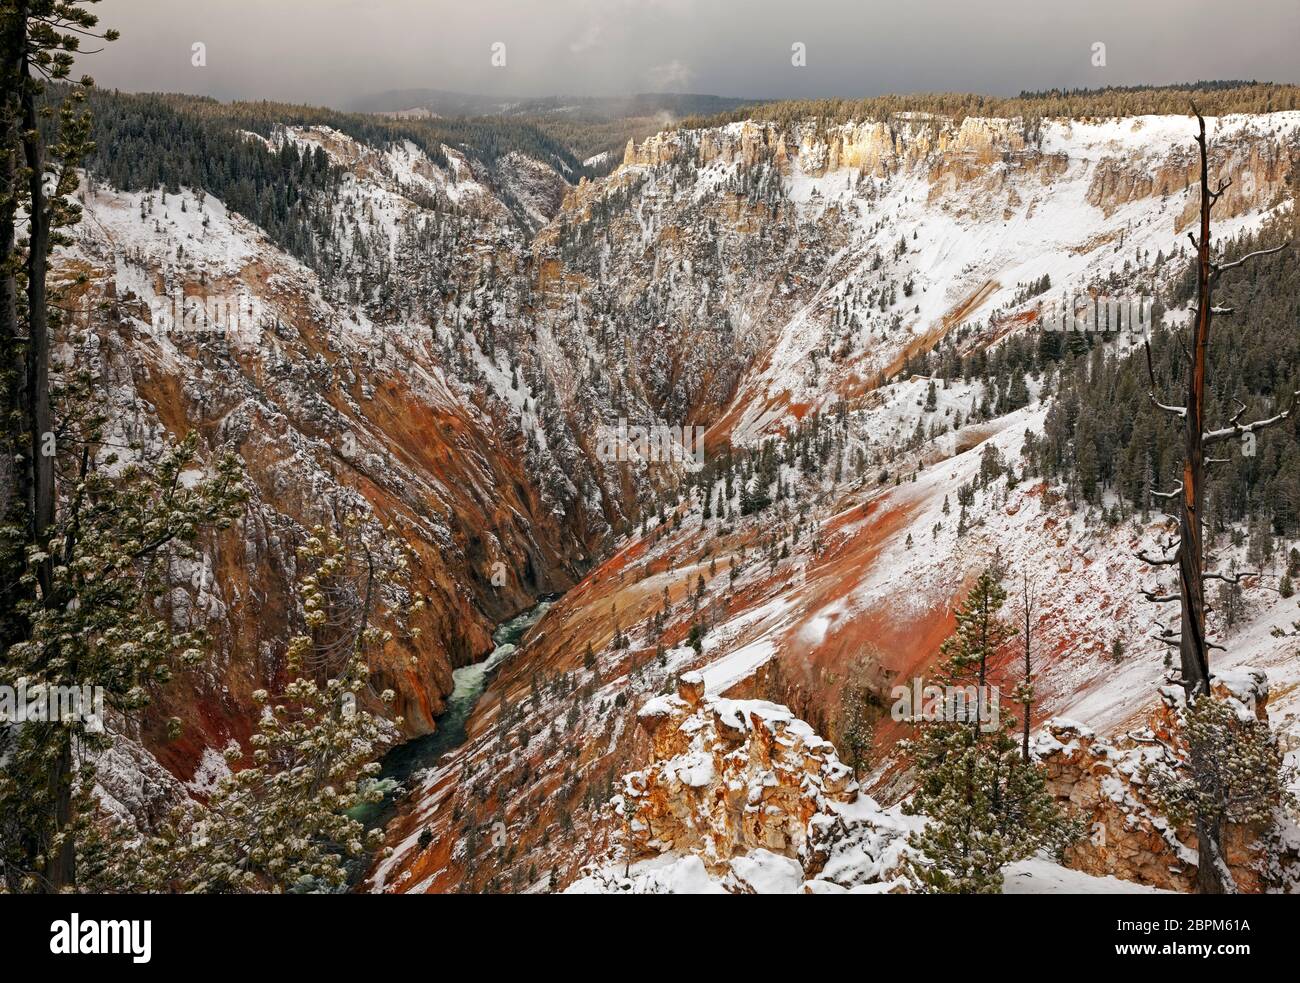 WY04408-00...WYOMING - Colorful walls of the Grand Canyon of the Yellowstone River on a cloudy day near Artist Point in Yellowstone National Park. Stock Photo